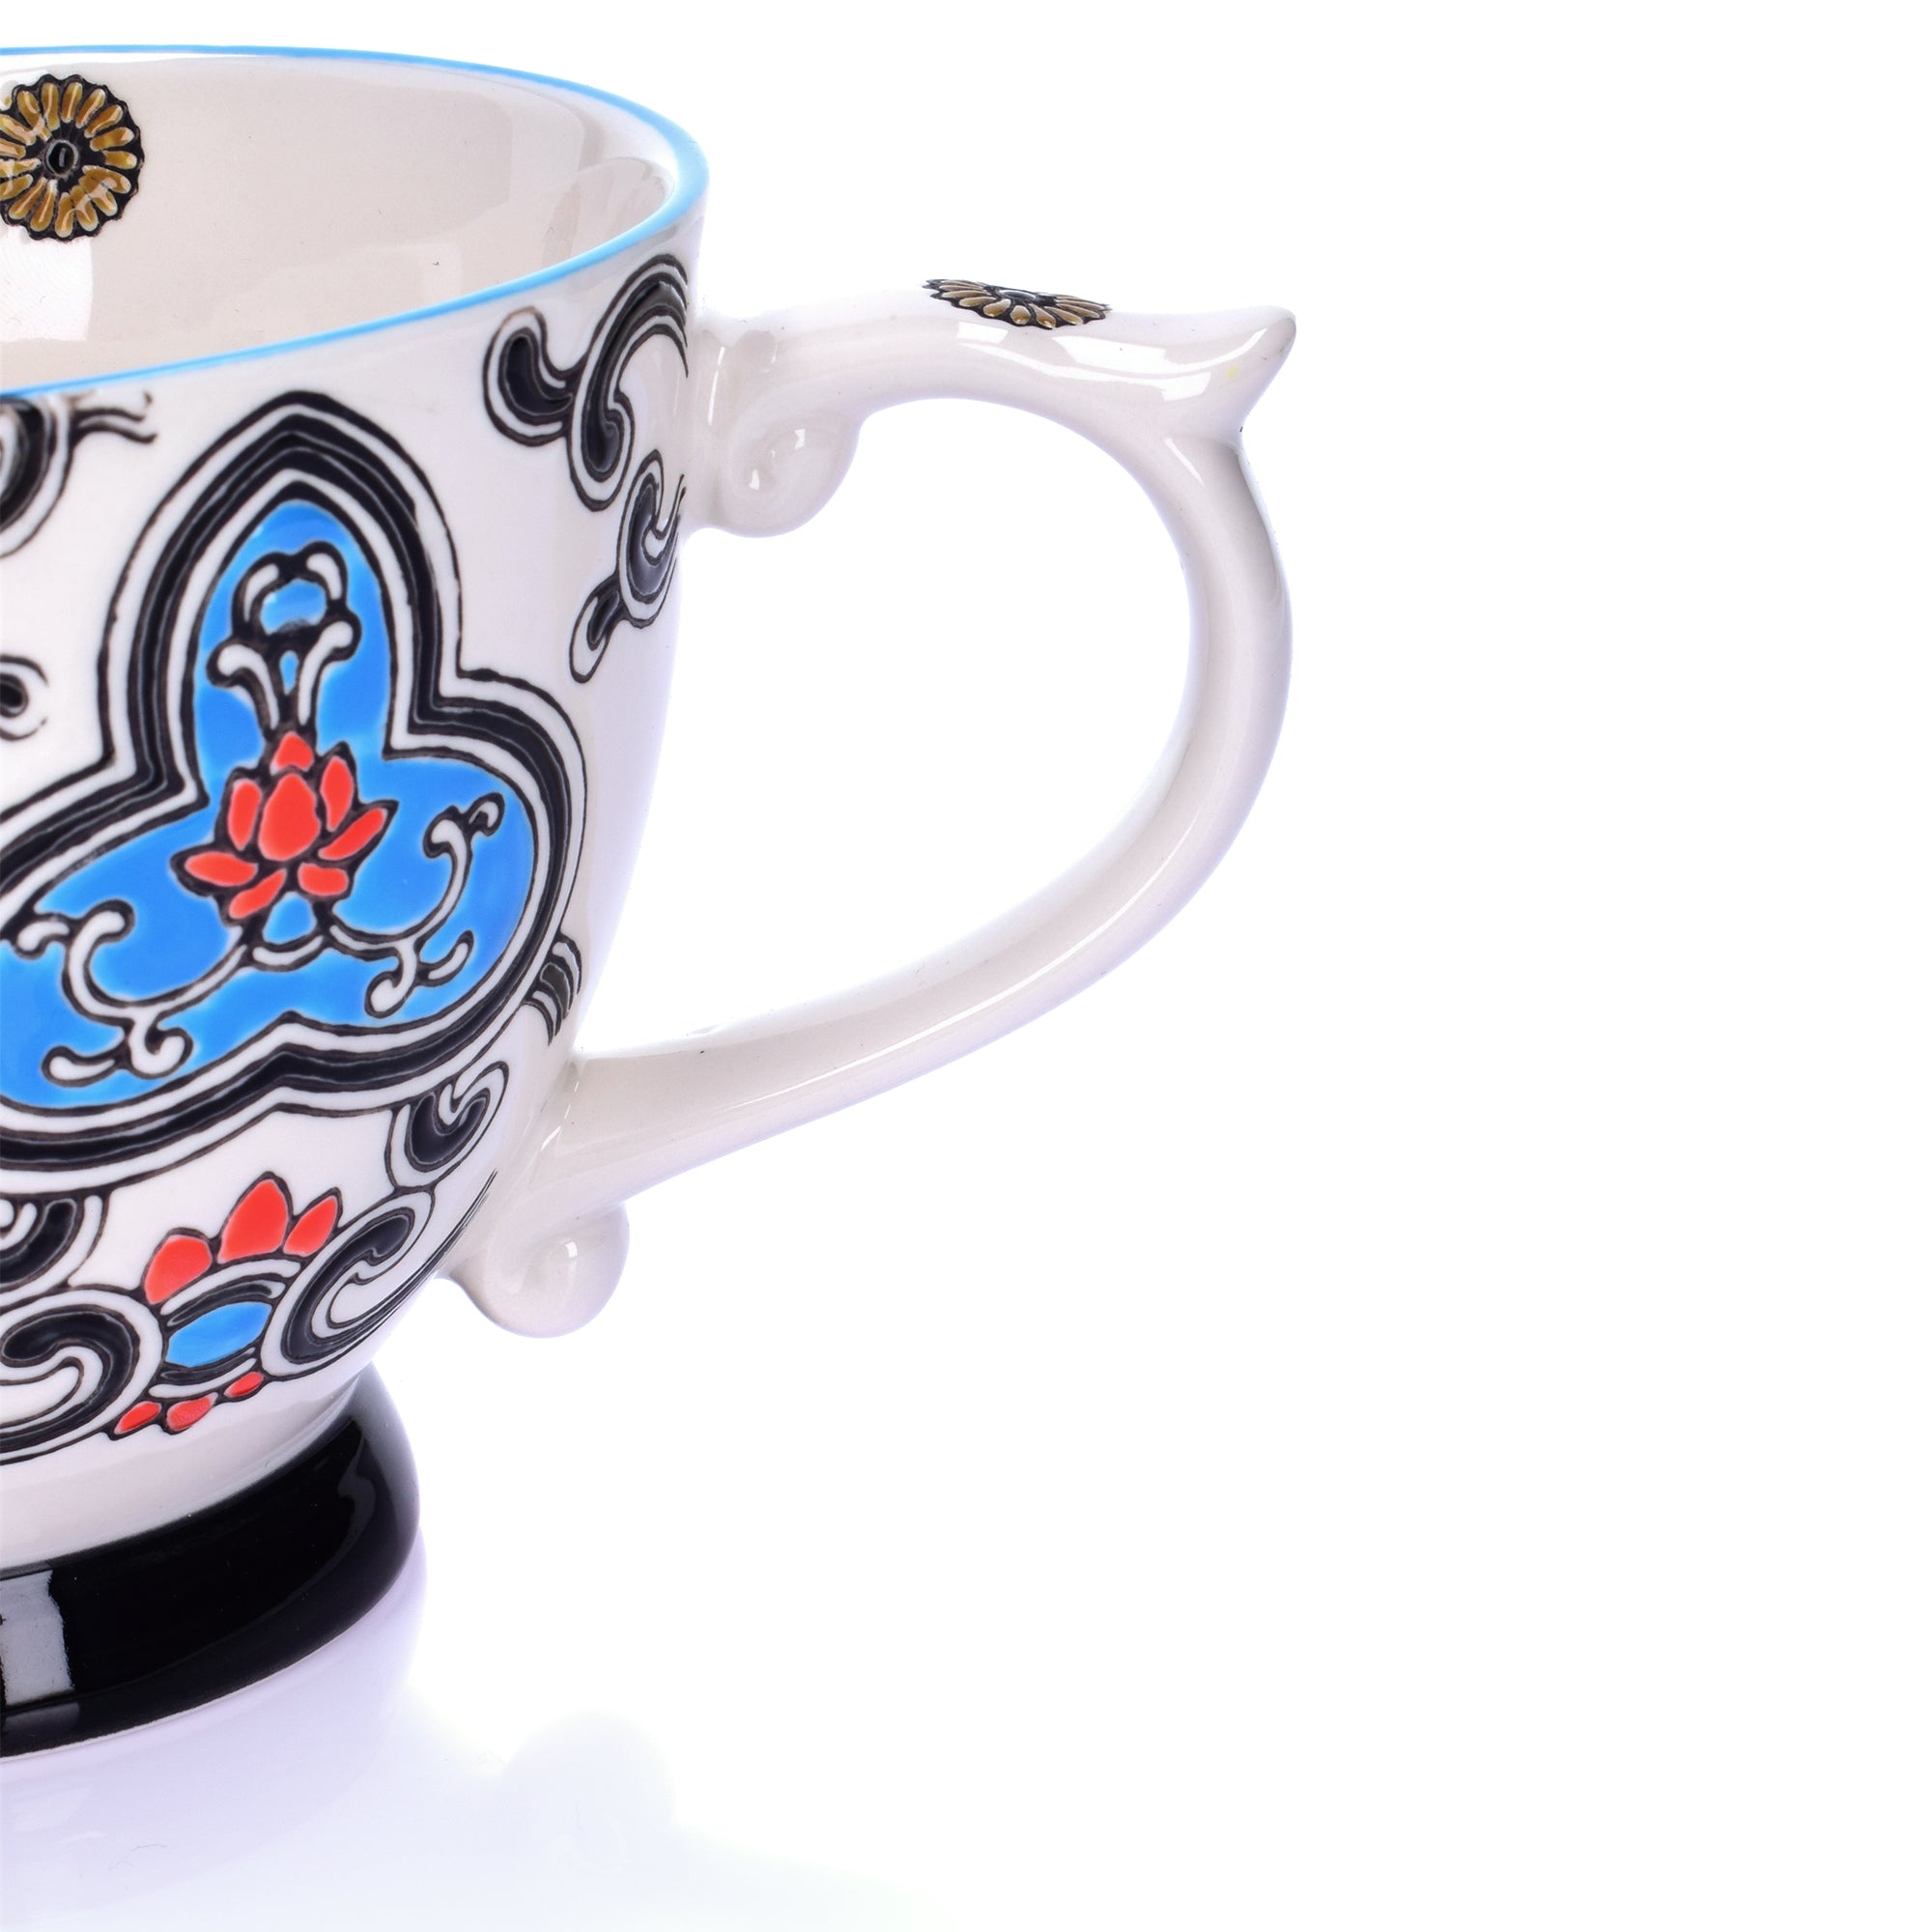 13-OZ Andalusia Inspired Porcelain Mug with Rich Colors